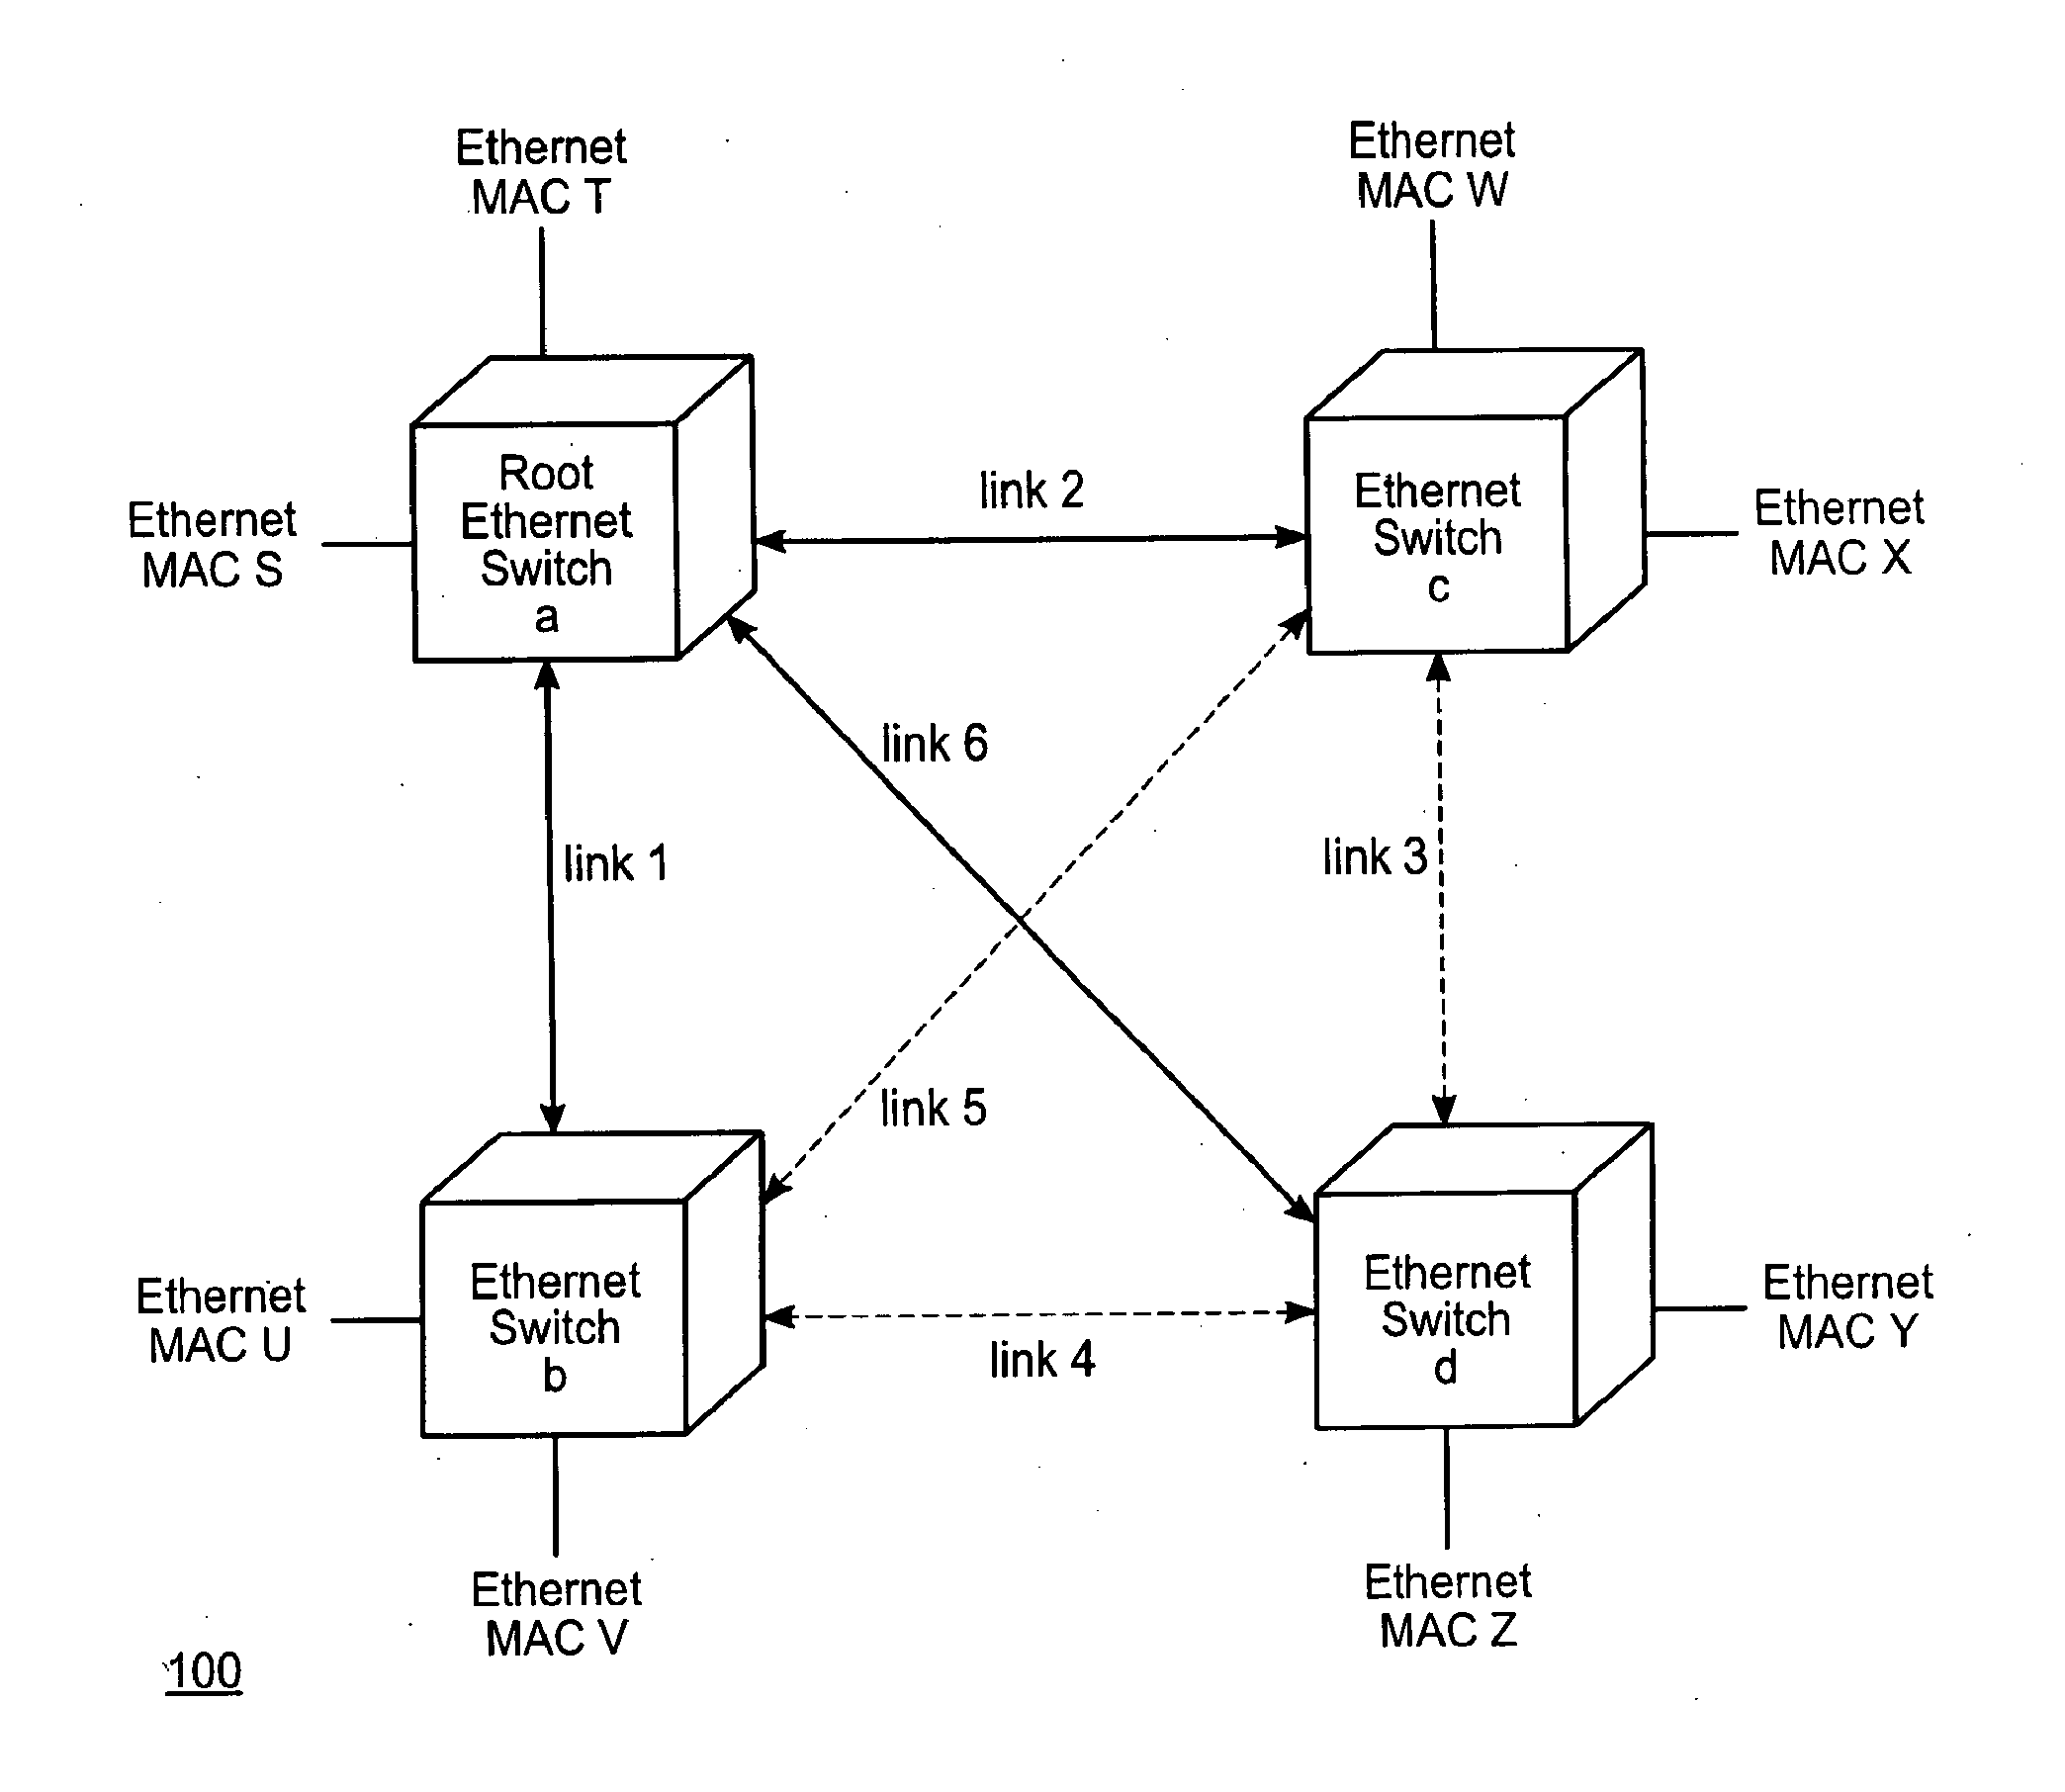 Performing rate limiting within a network